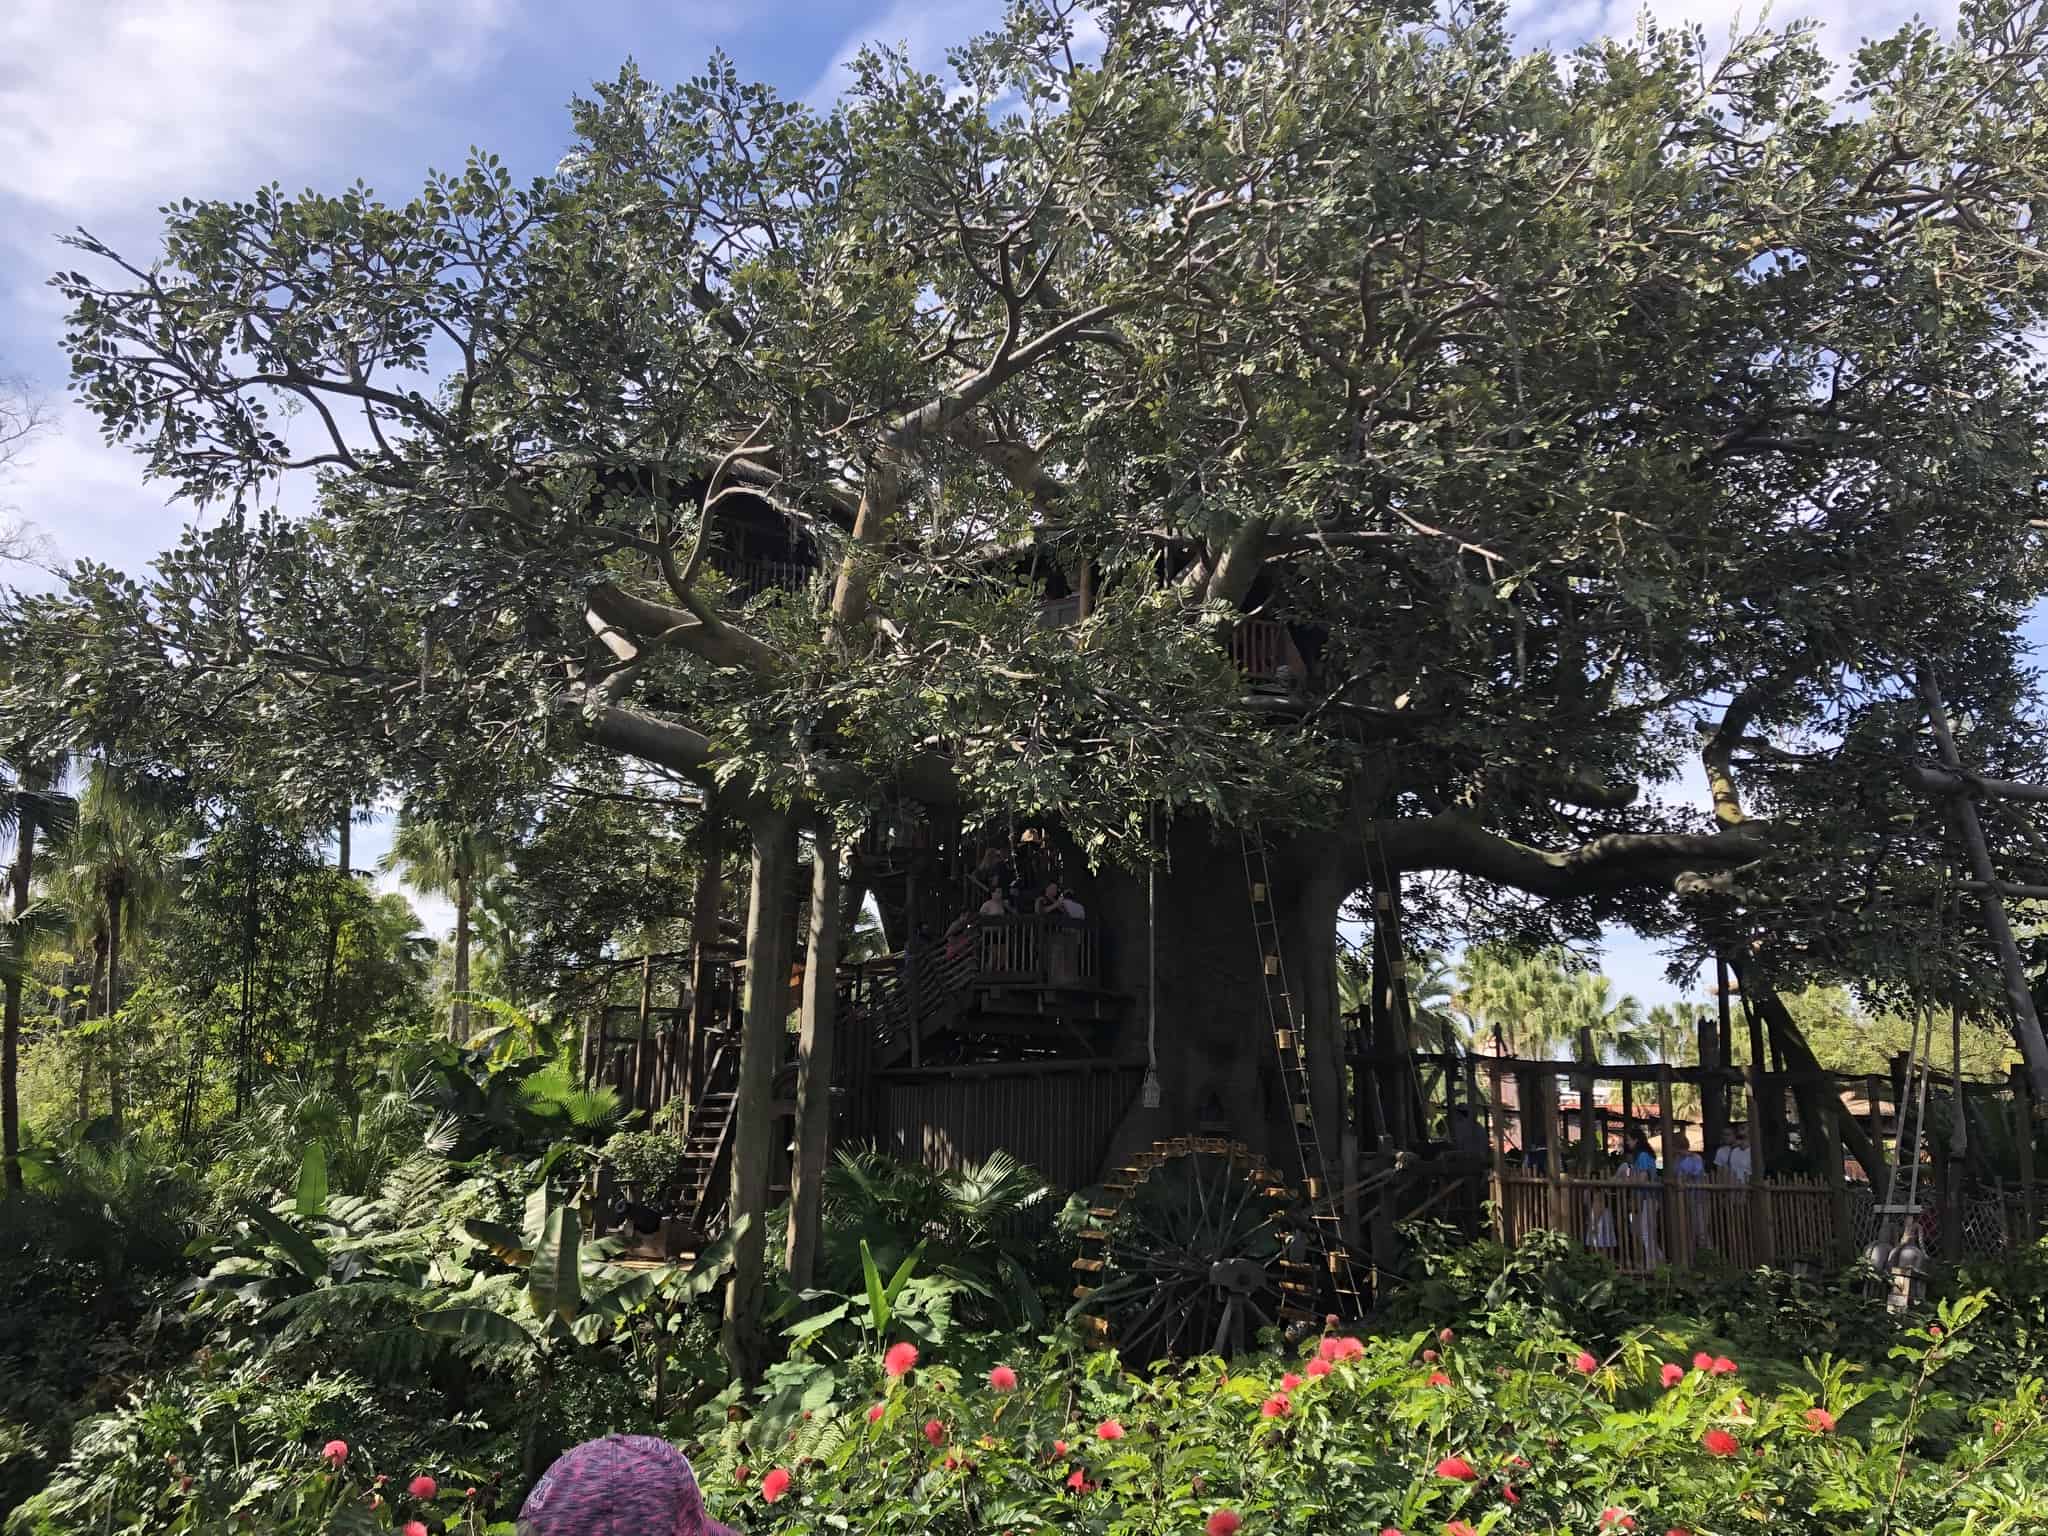 Swiss Family Treehouse At The Magic Kingdom Closing For Refurbishment In Wdw News Today